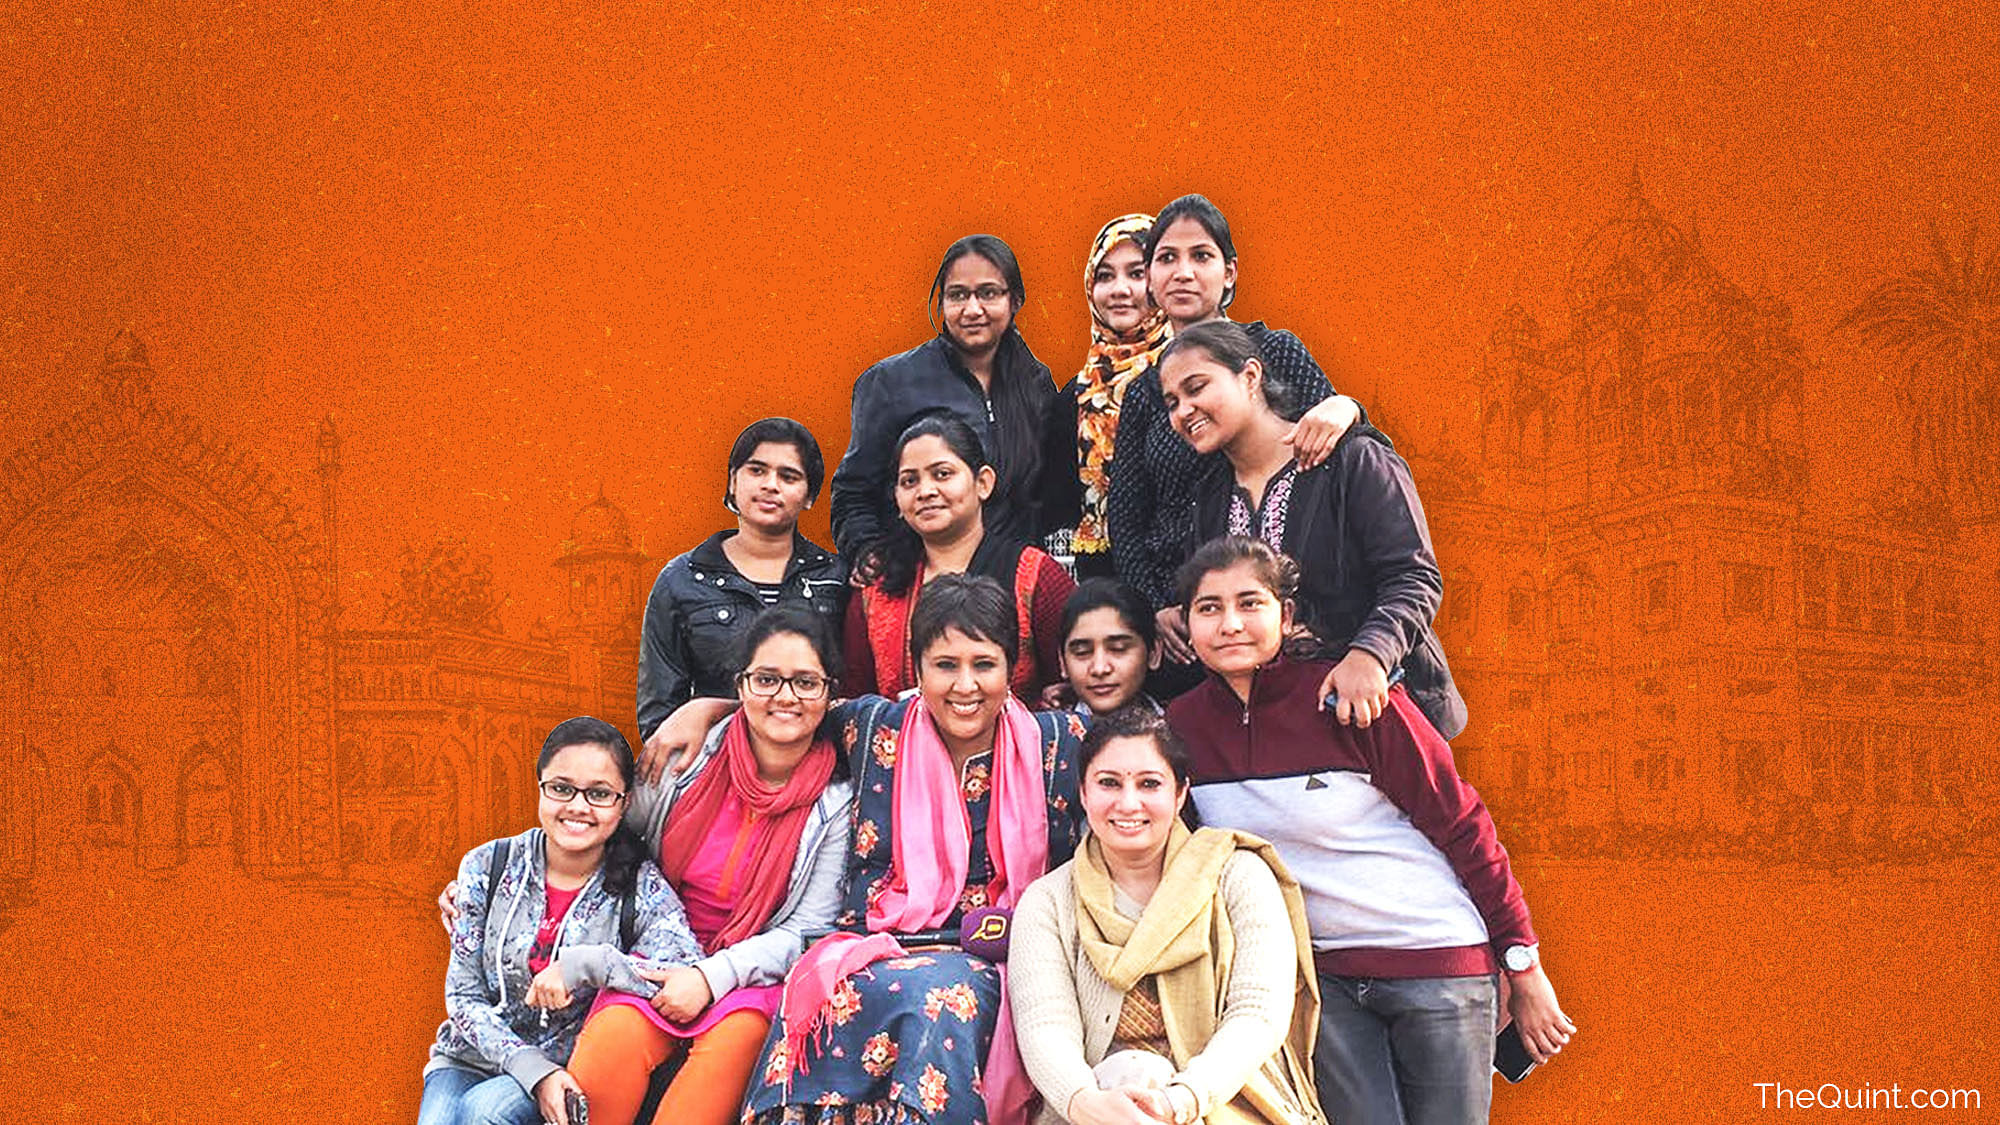 

Barkha Dutt with young women in the Lucknow University. (Photo: <b>The Quint</b>)